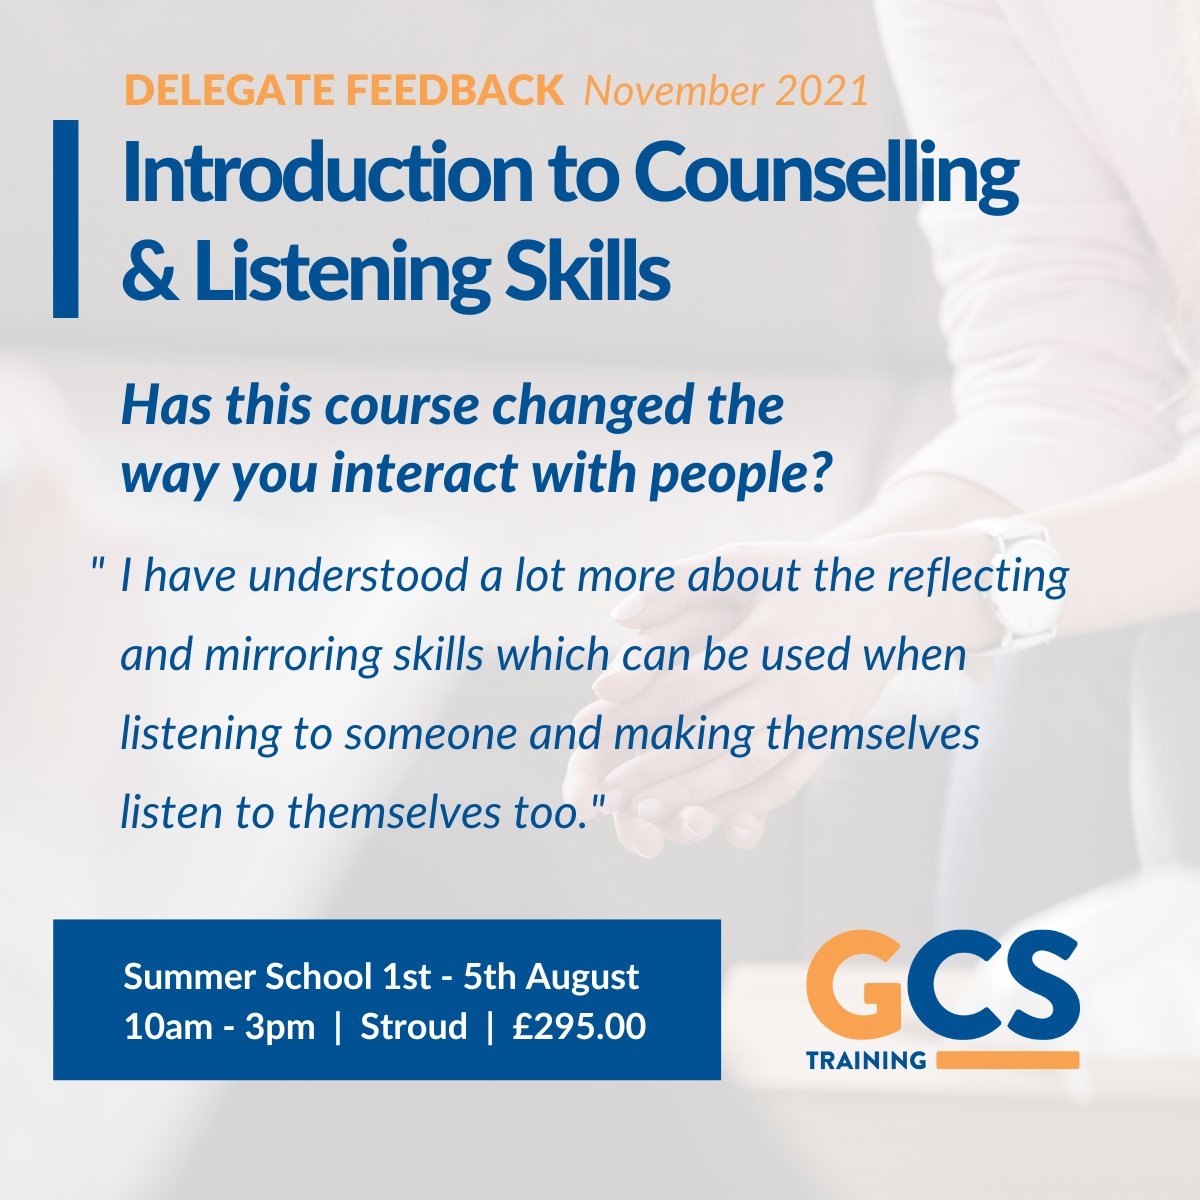 Weekend courses not for you?
Try our Summer school. In one week you'll be able to explore counselling skills and develop your listening skills.  This course can be your first step into counselling, find out more ow.ly/rQcx50JJte1
#listeningskills #stroud #introtocounselling